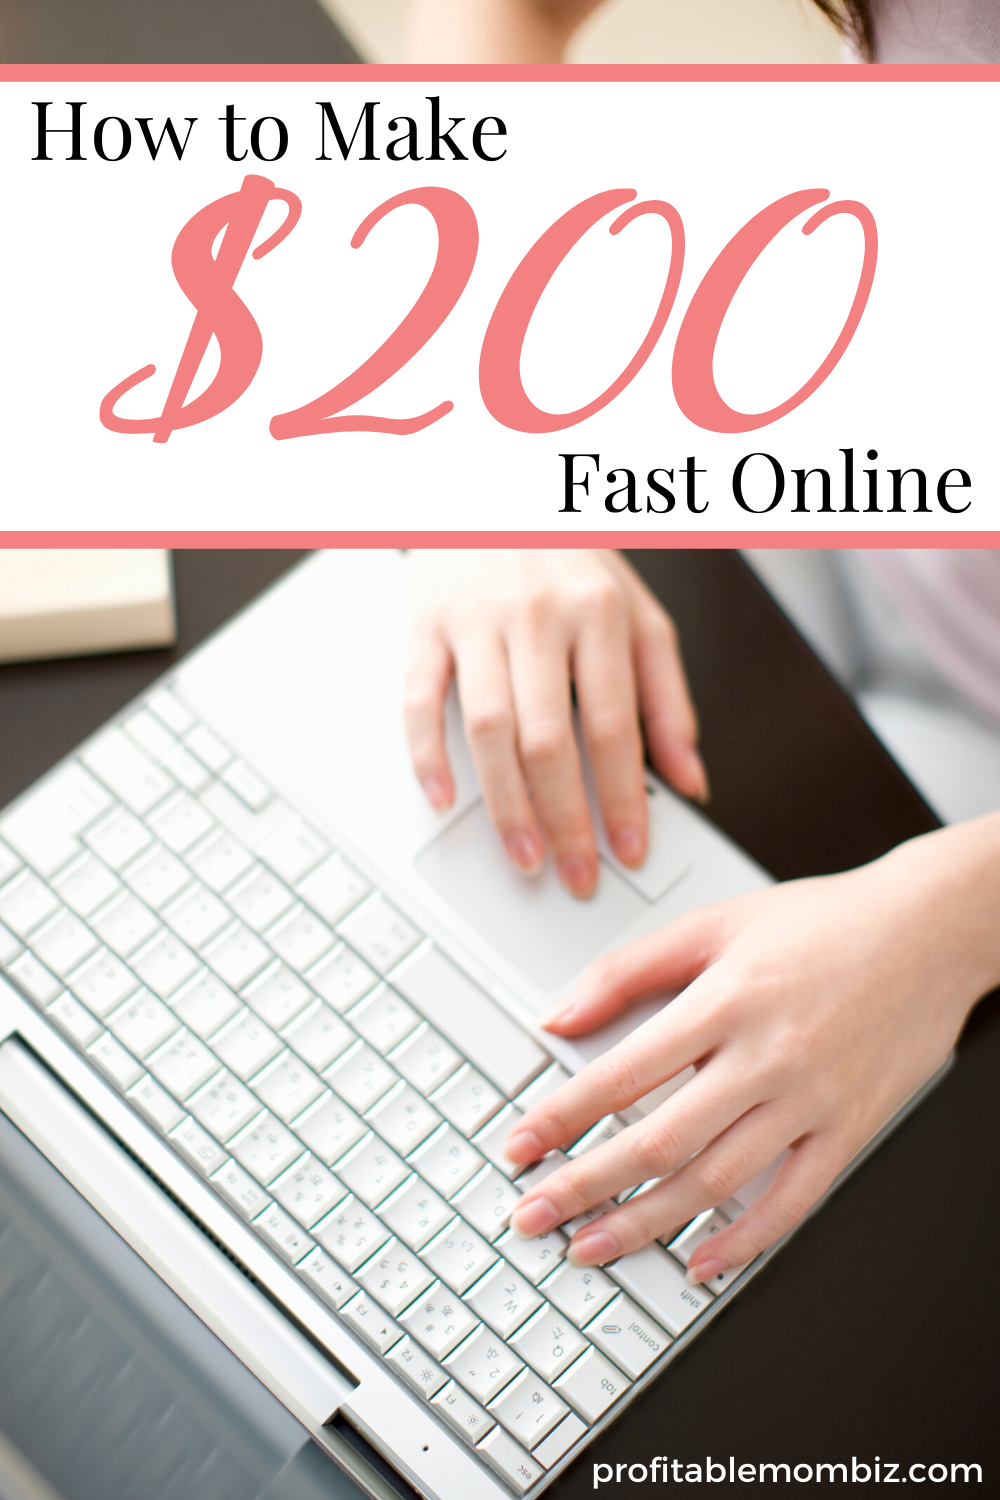 Learn how to make $200 fast online in 4 easy ways!